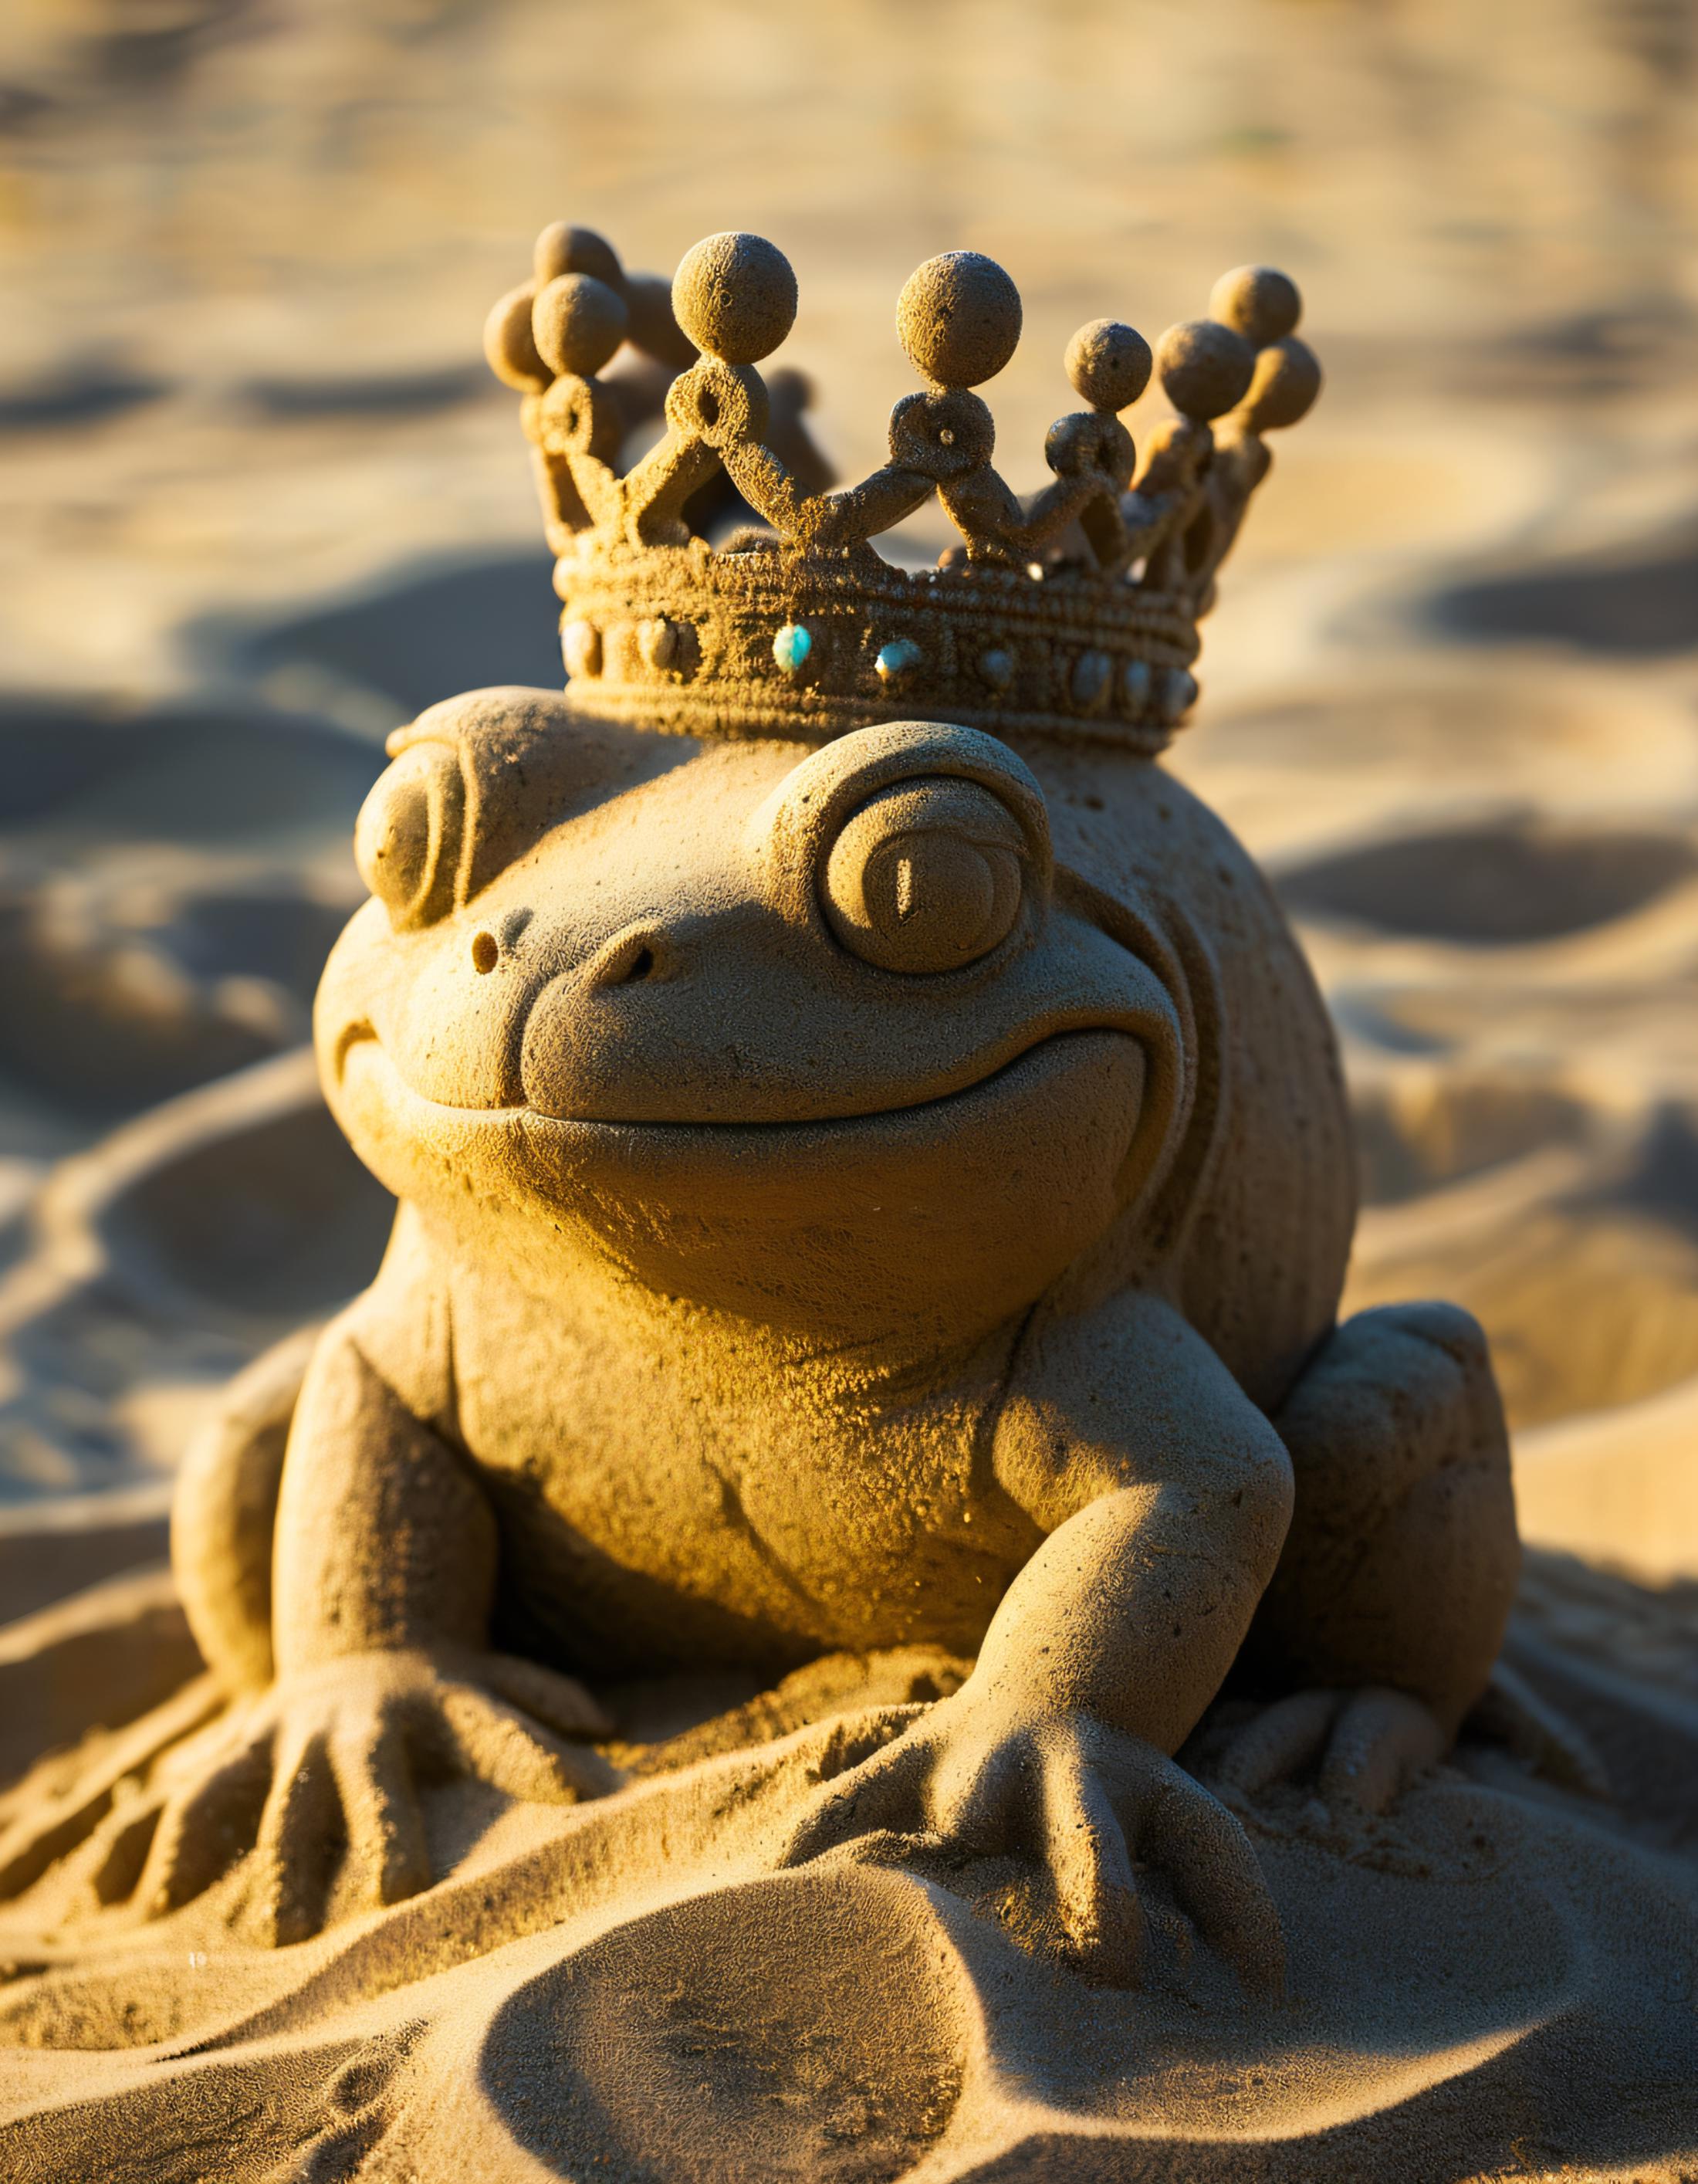 XL Realistic sand sculpture art style image by Standspurfahrer